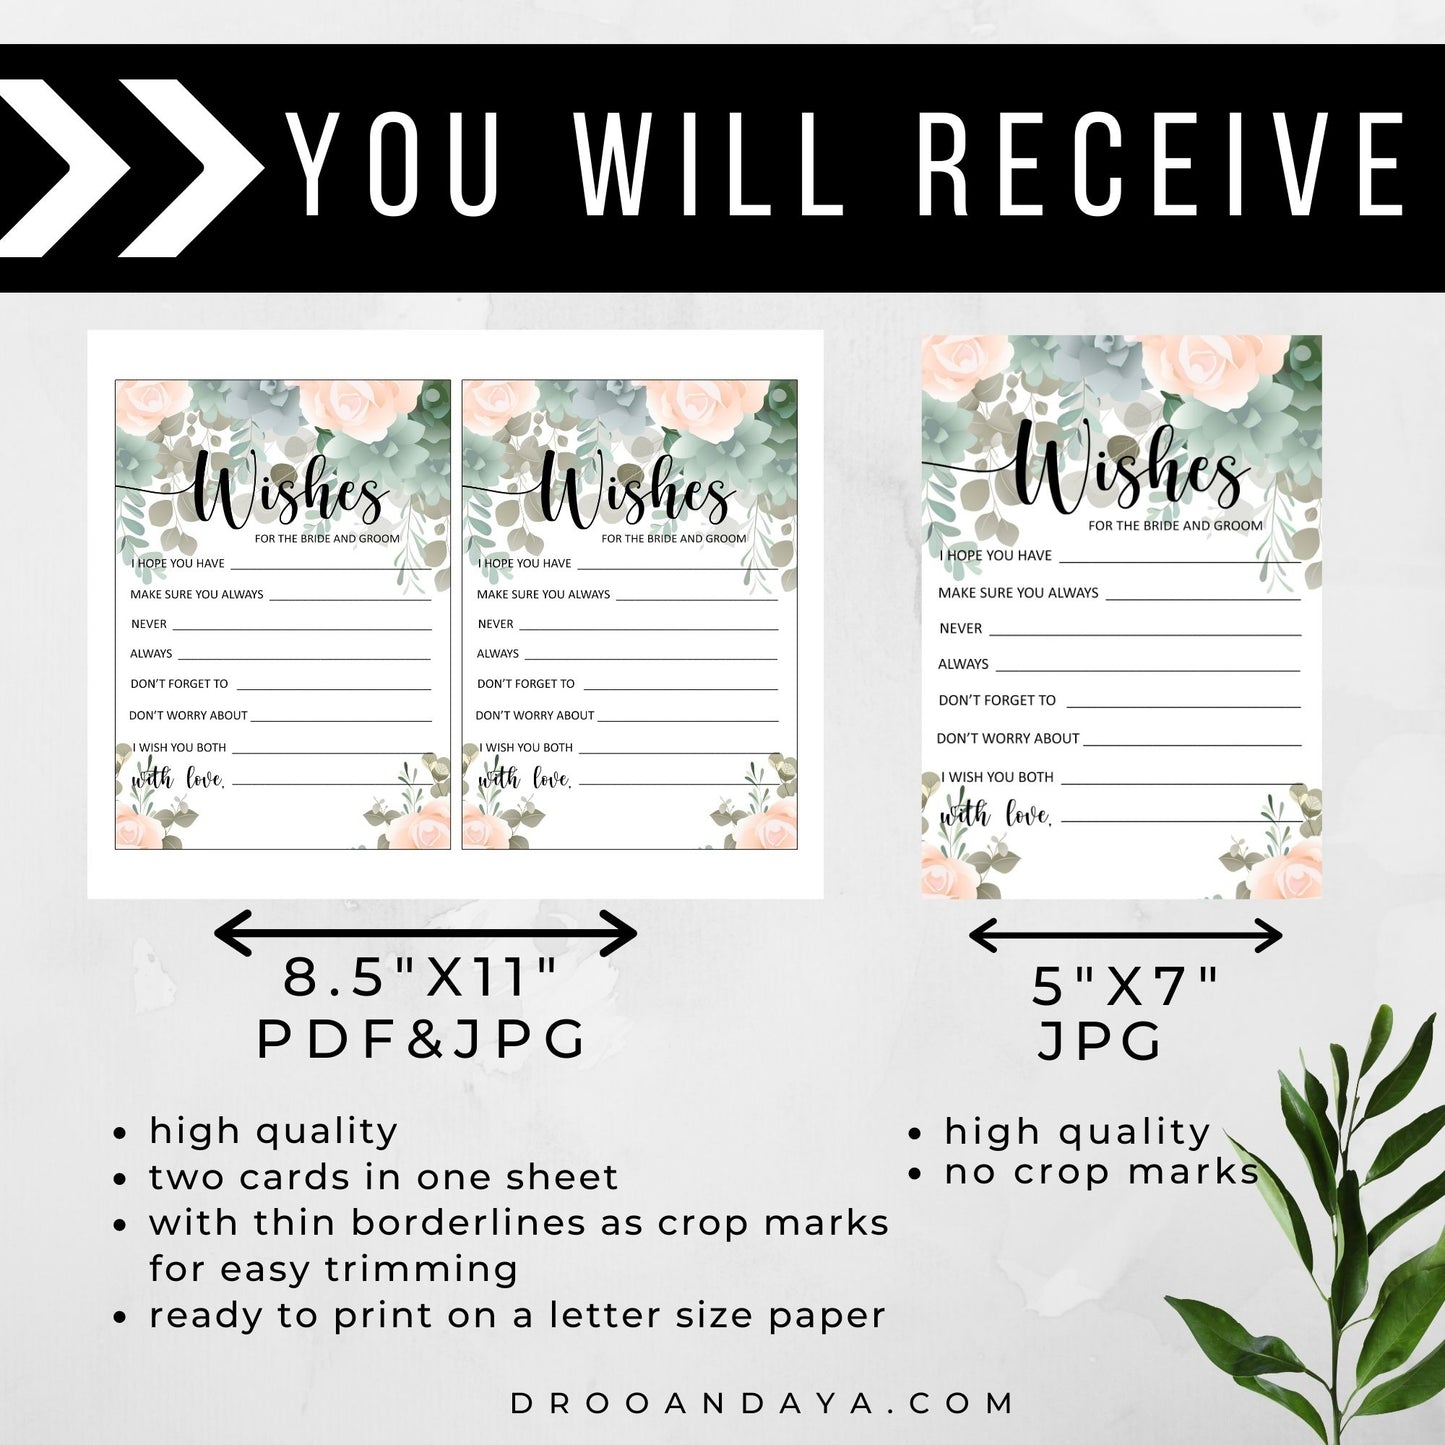 Wedding Advice Cards for the Bride and Groom Floral Theme - Droo & Aya